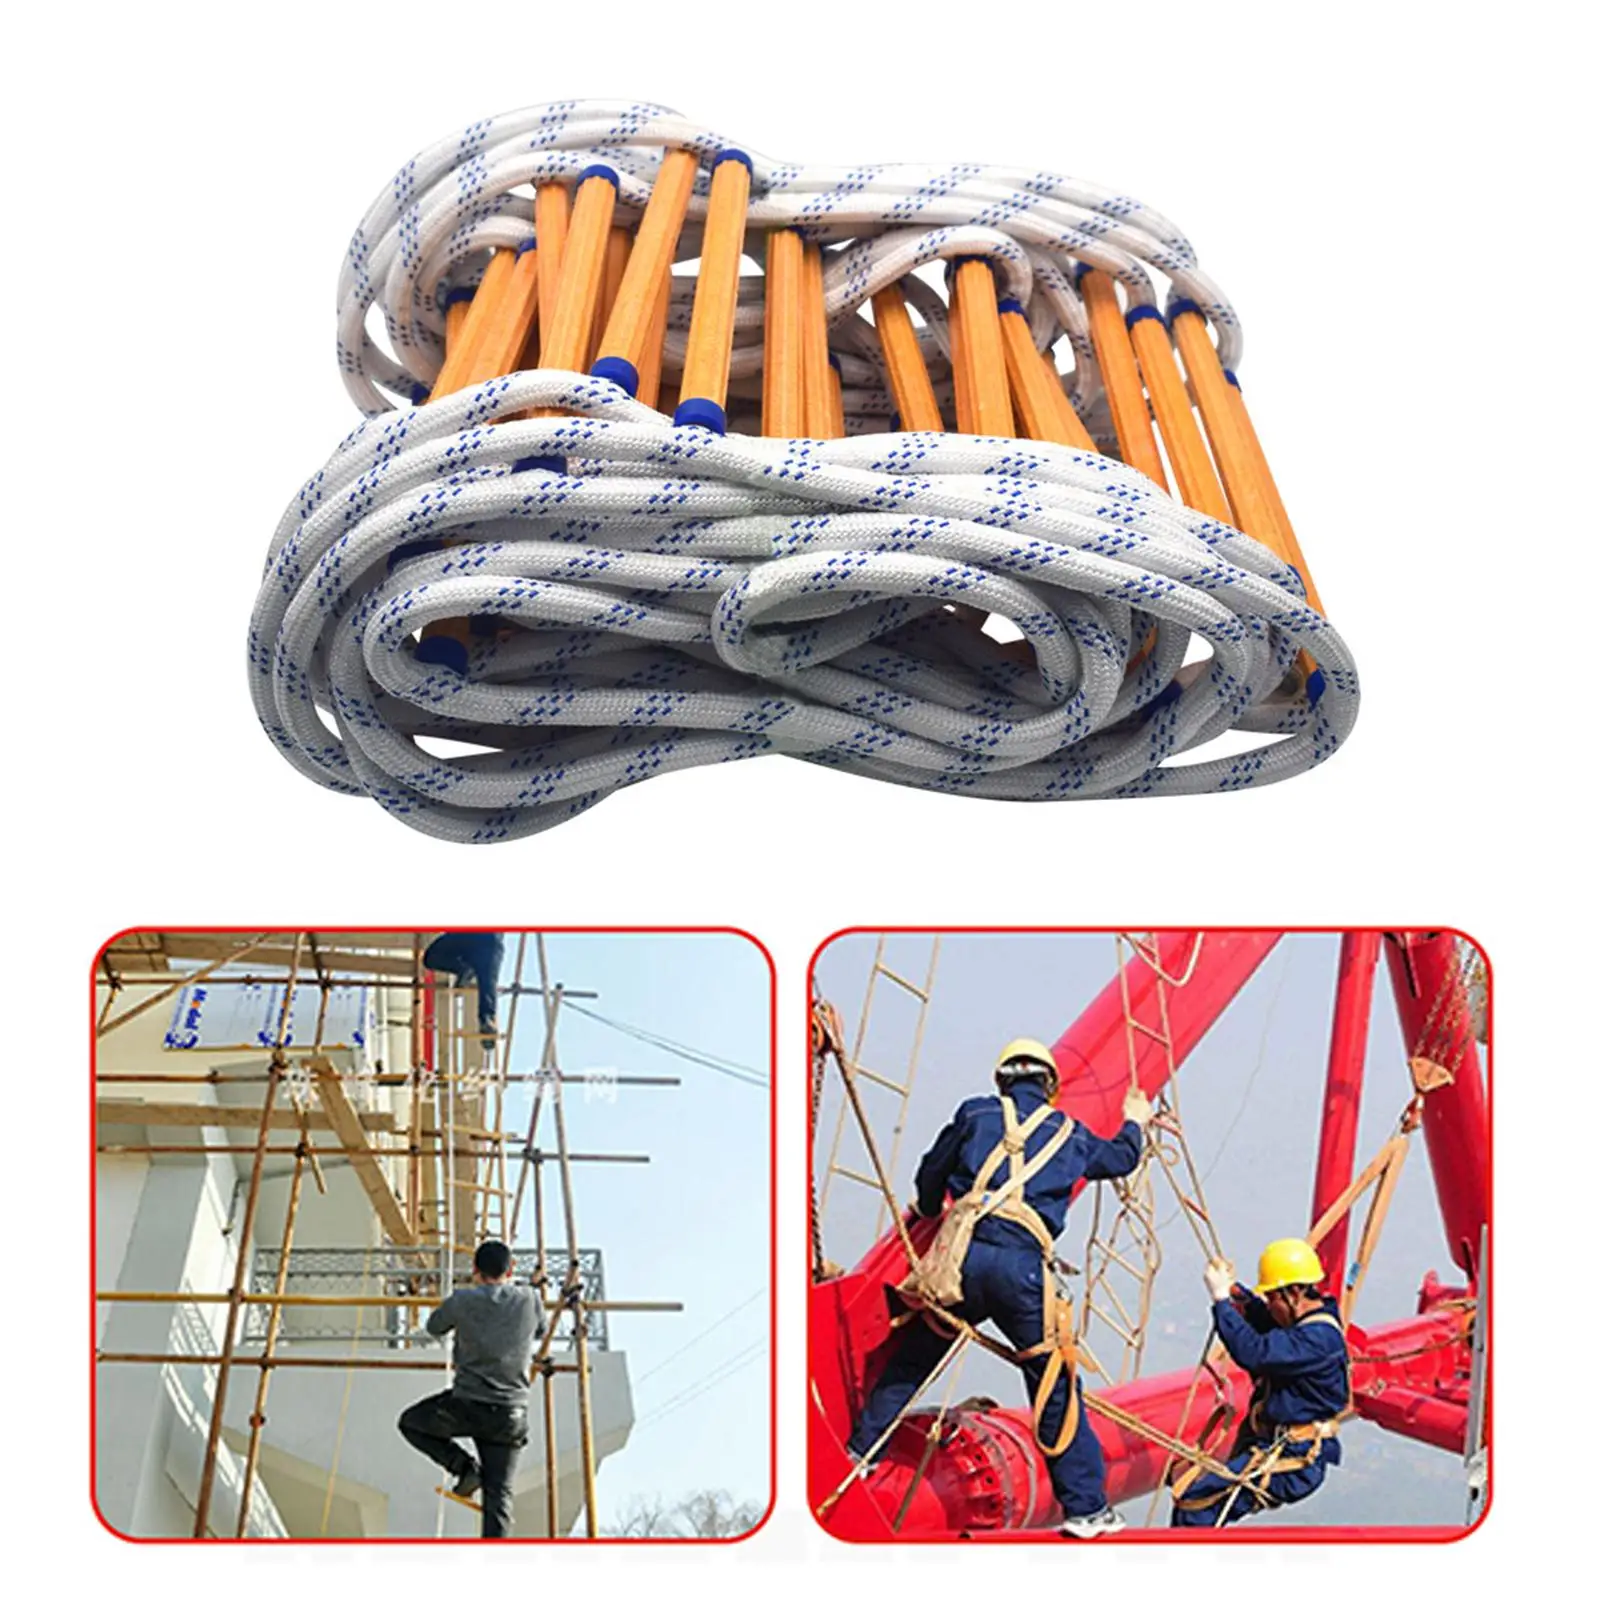 Emergency Escape Ladder Soft Rope W/ Hooks Flame Resistant for Engineering